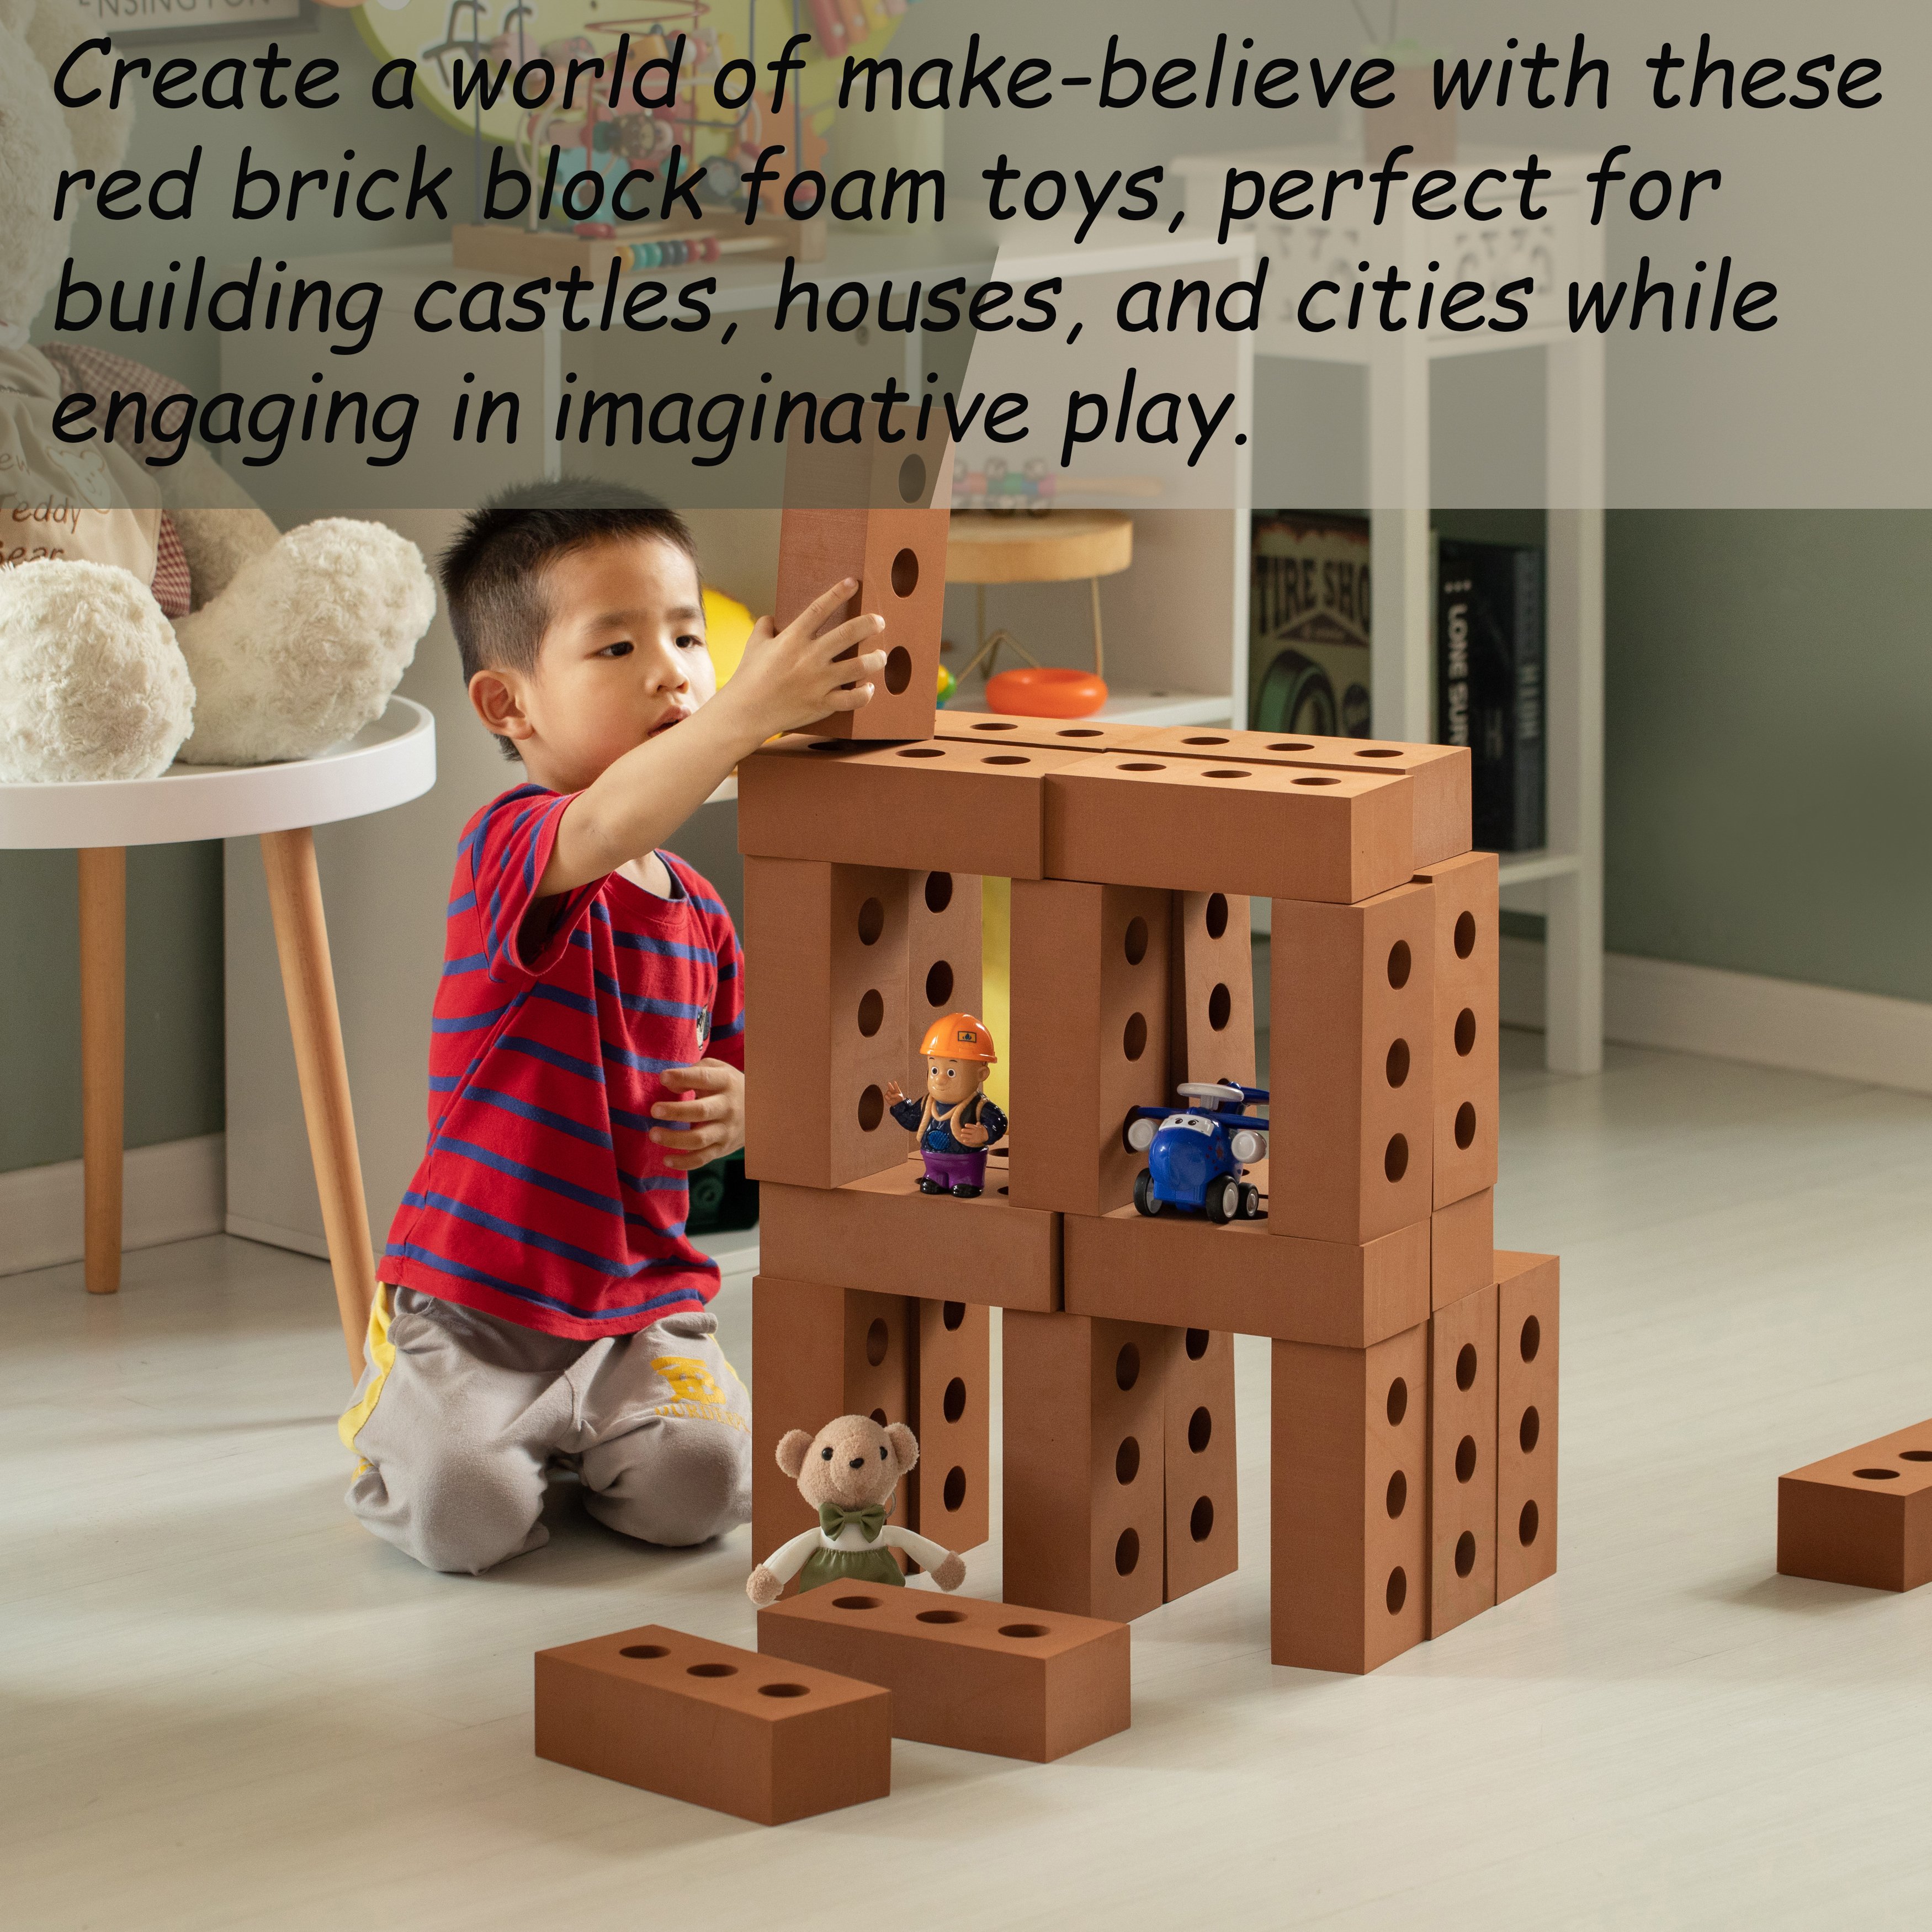 Construction Stacking Building Red Brick Block, Rectangle Foam Kids Pretend Play Creativity Toy, 25 Pack